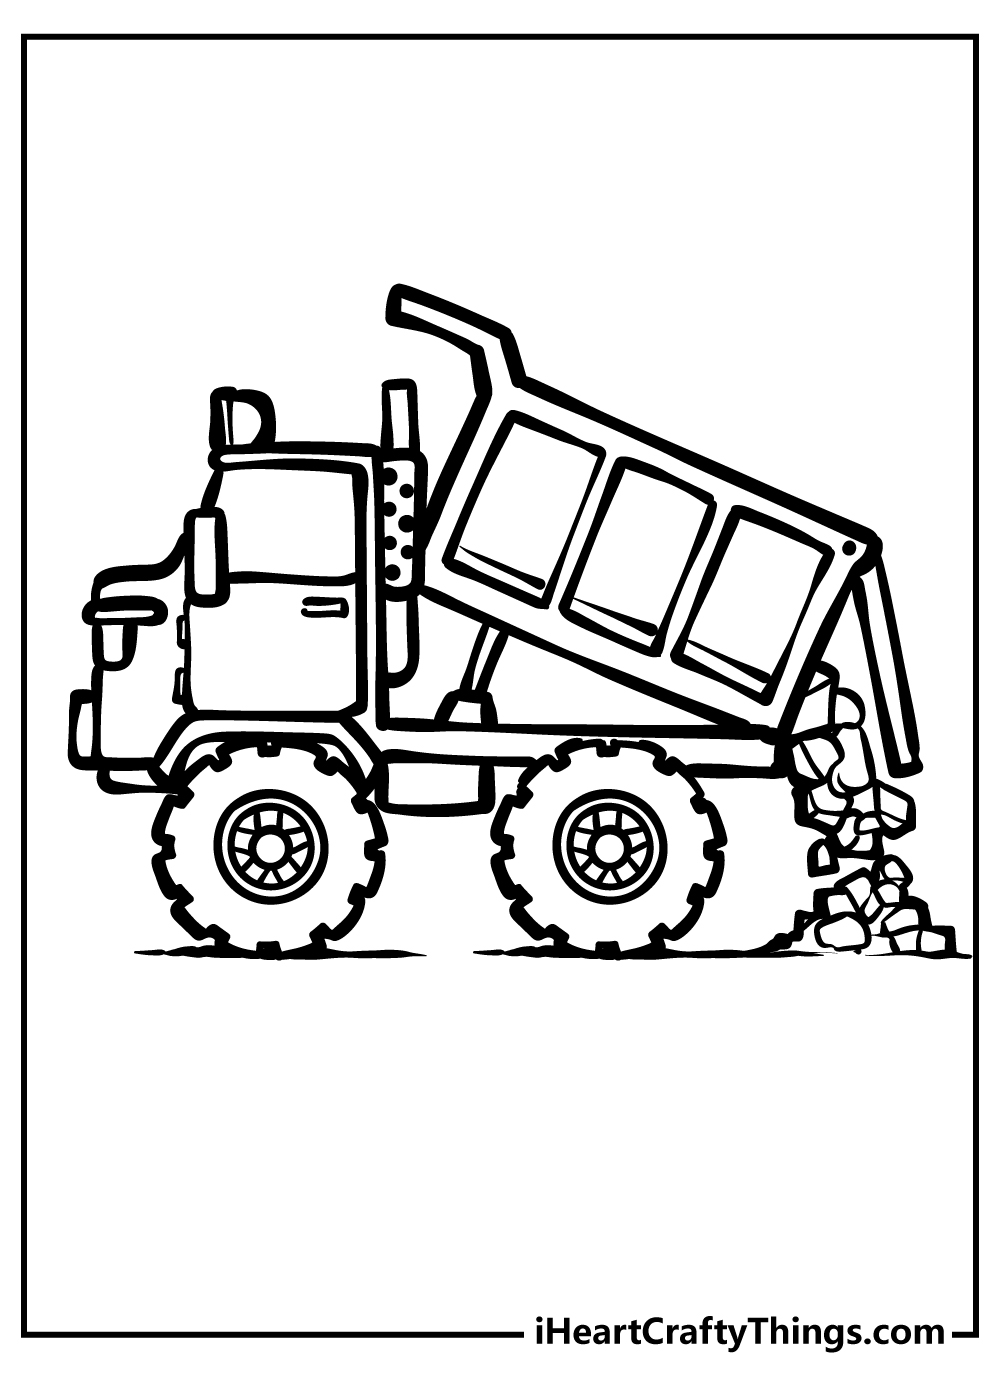 Dump Truck coloring pages free printables